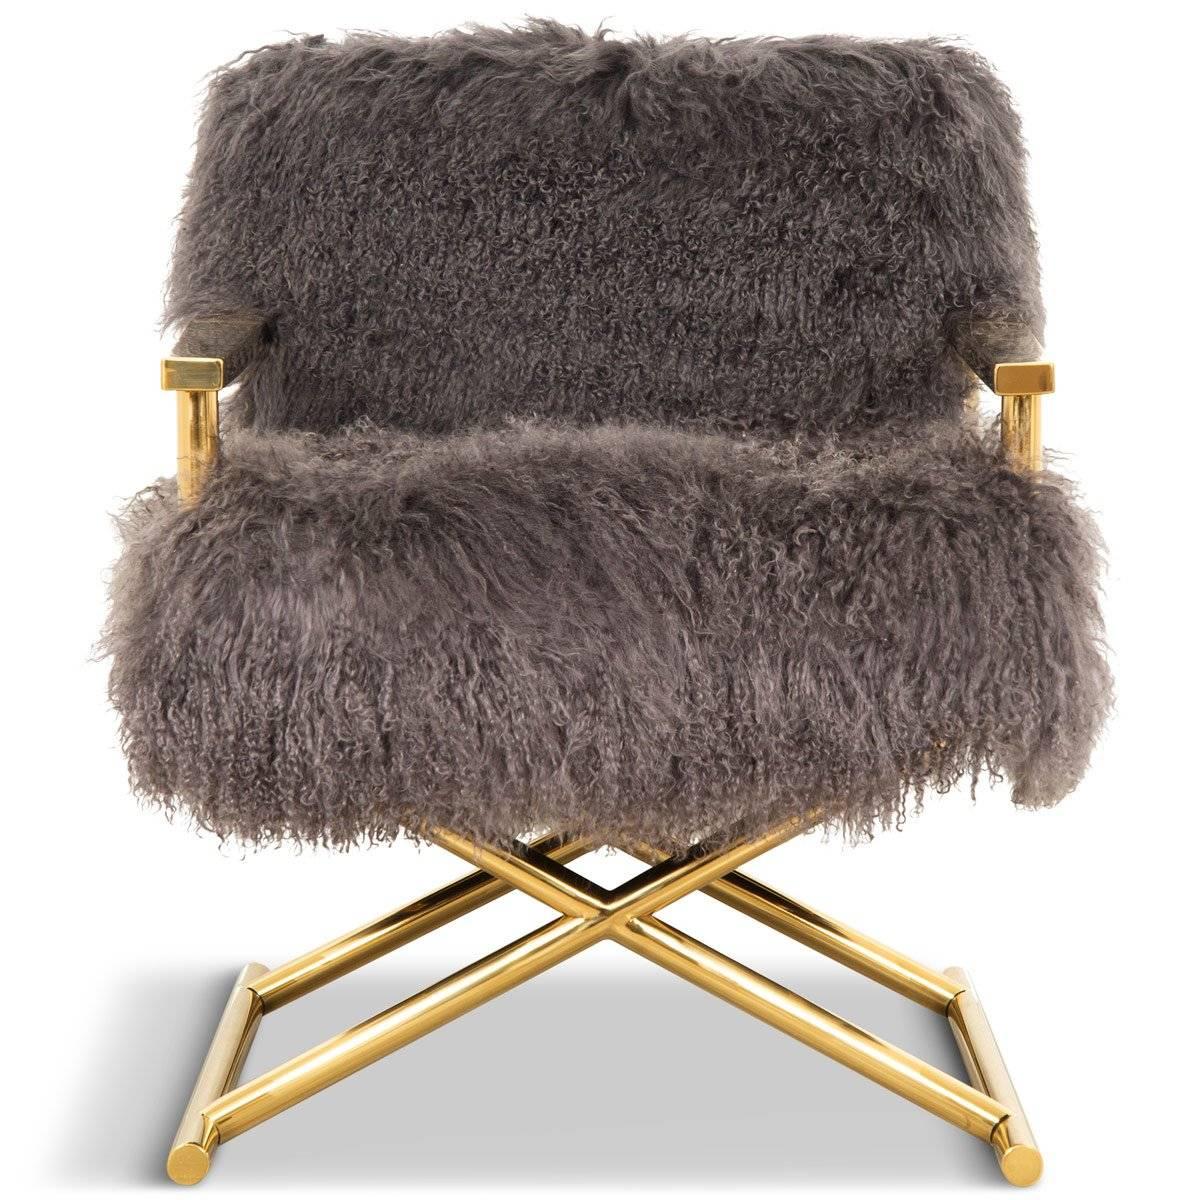 American Modern Style Directors Chair Ivory or Charcoal Mongolian Fur & Solid Brass Frame